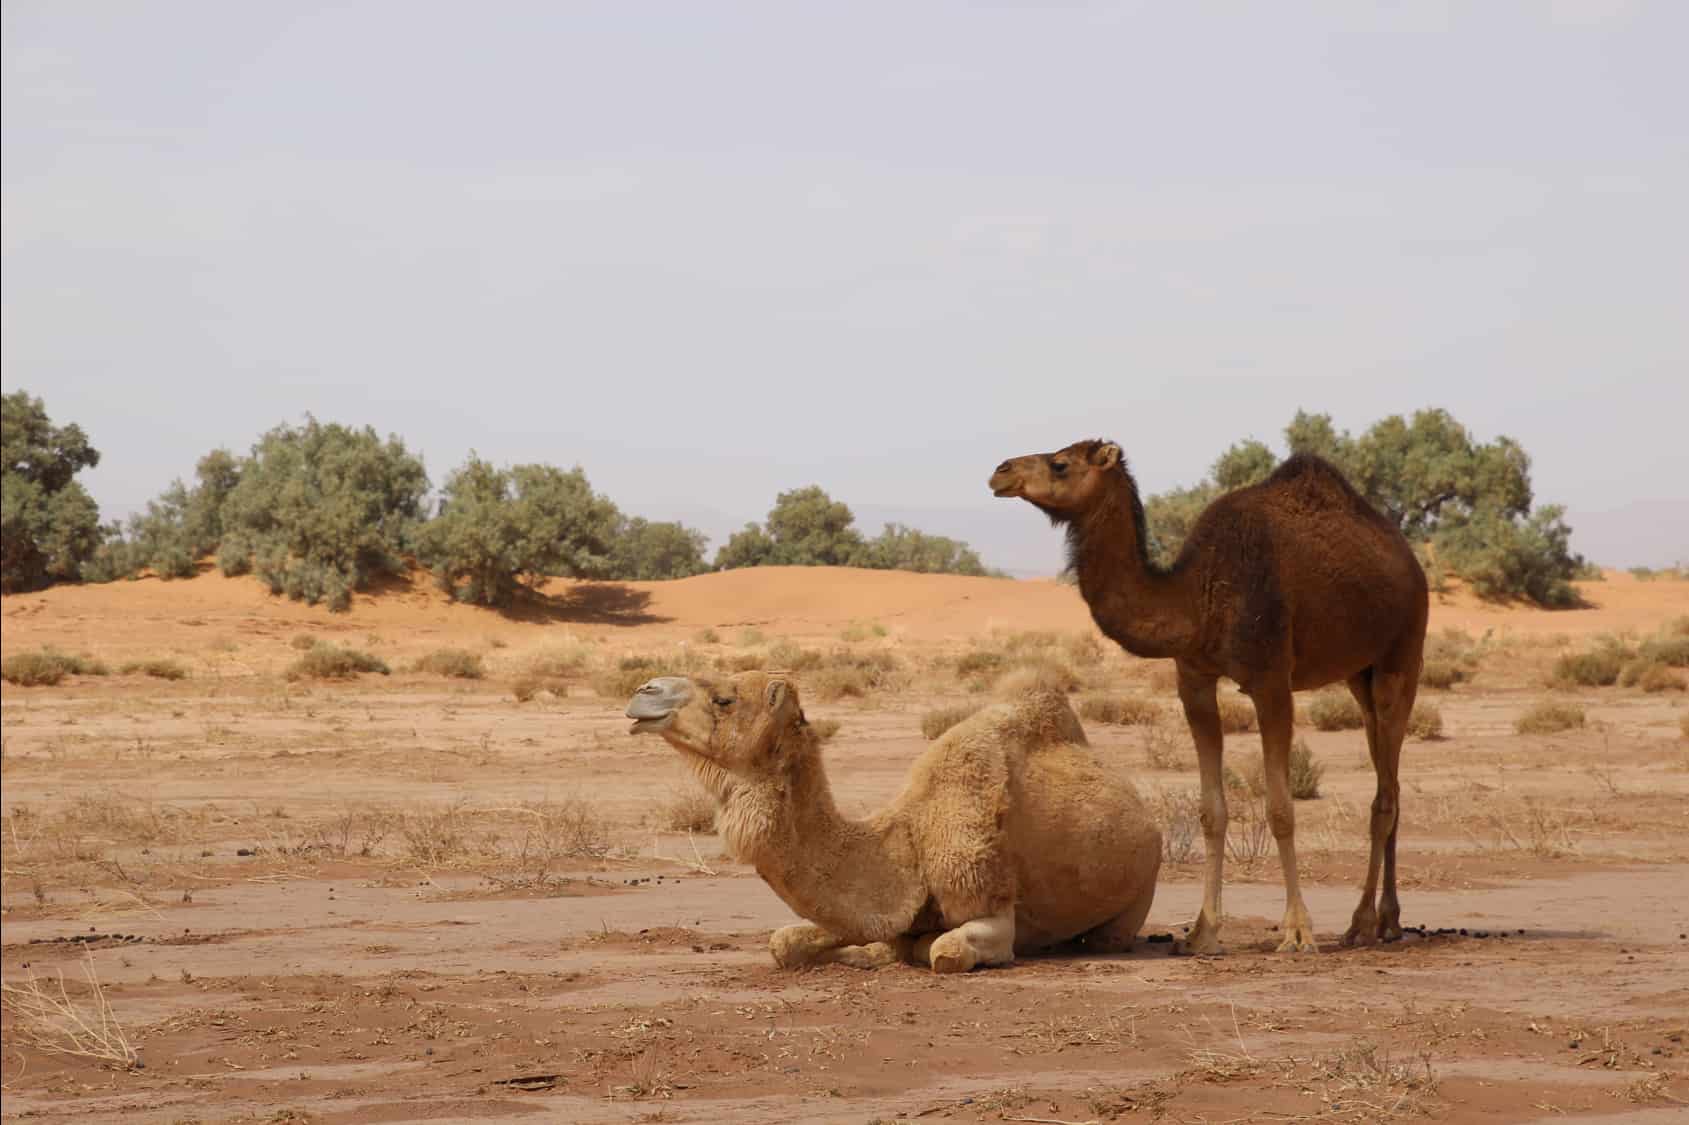 Camels at the boarder of the Sahara